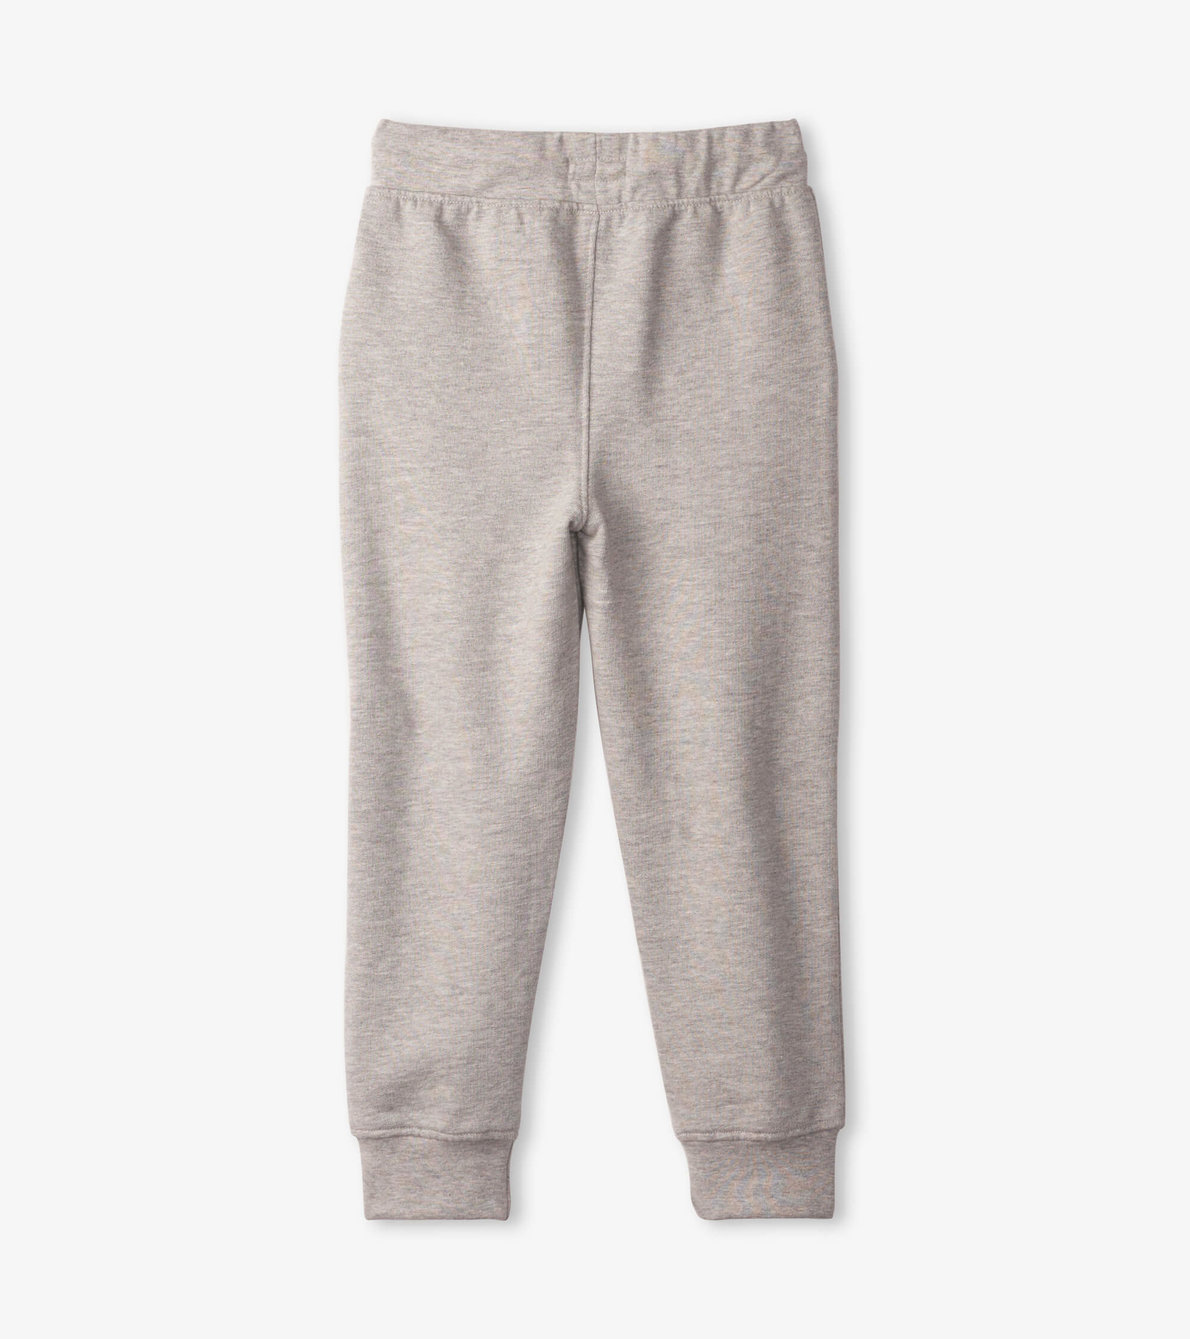 View larger image of Boys Athletic Grey Slim Fit Joggers